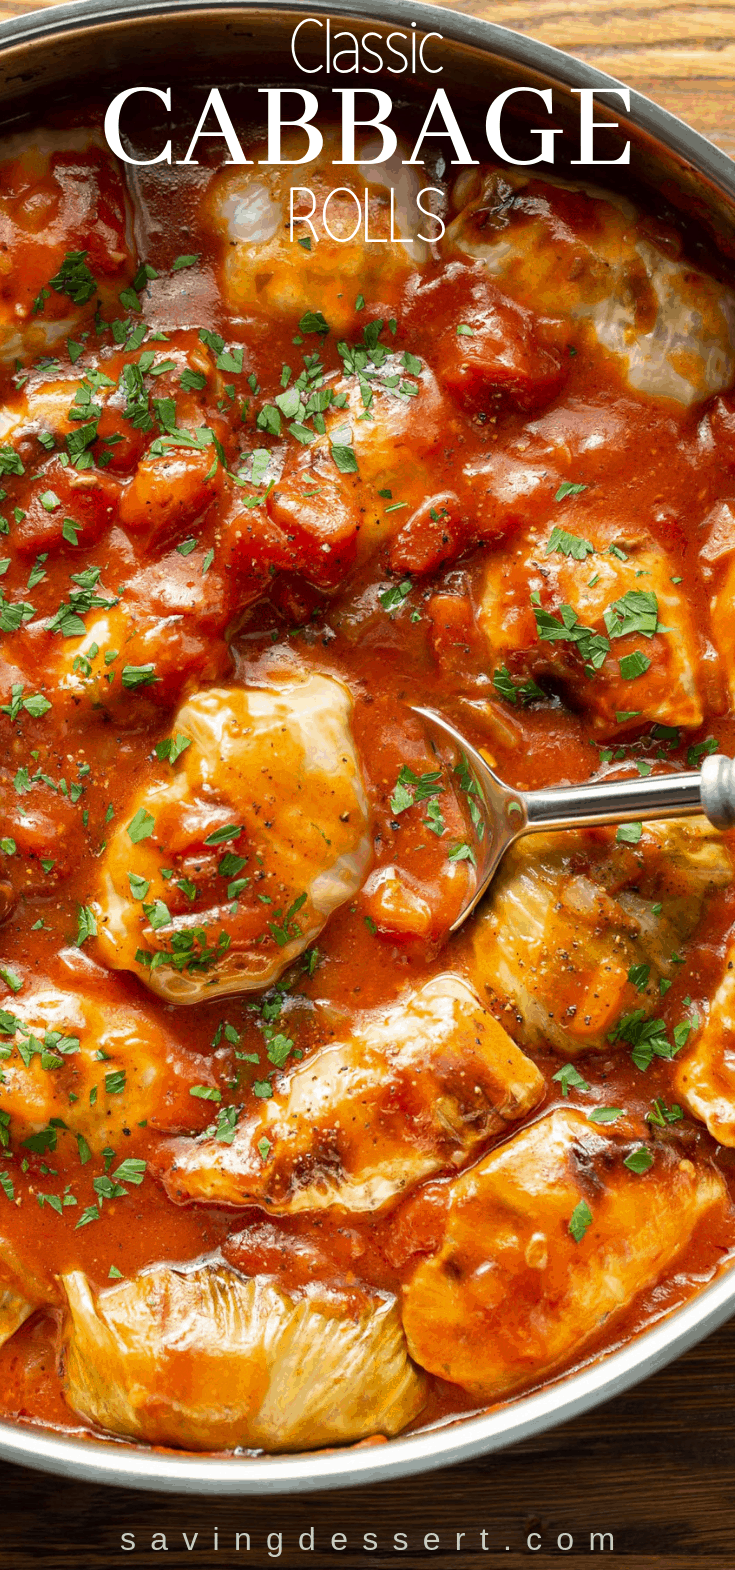 Classic Cabbage Rolls Recipe - with tender cabbage leaves stuffed with rice, seasoned ground beef and caramelized onions. #savingroomfordessert #cabbagerolls #classiccabbagerolls #cabbagerollsrecipe #groundbeef #cabbage #tomatosauce #dinner #comfortfood